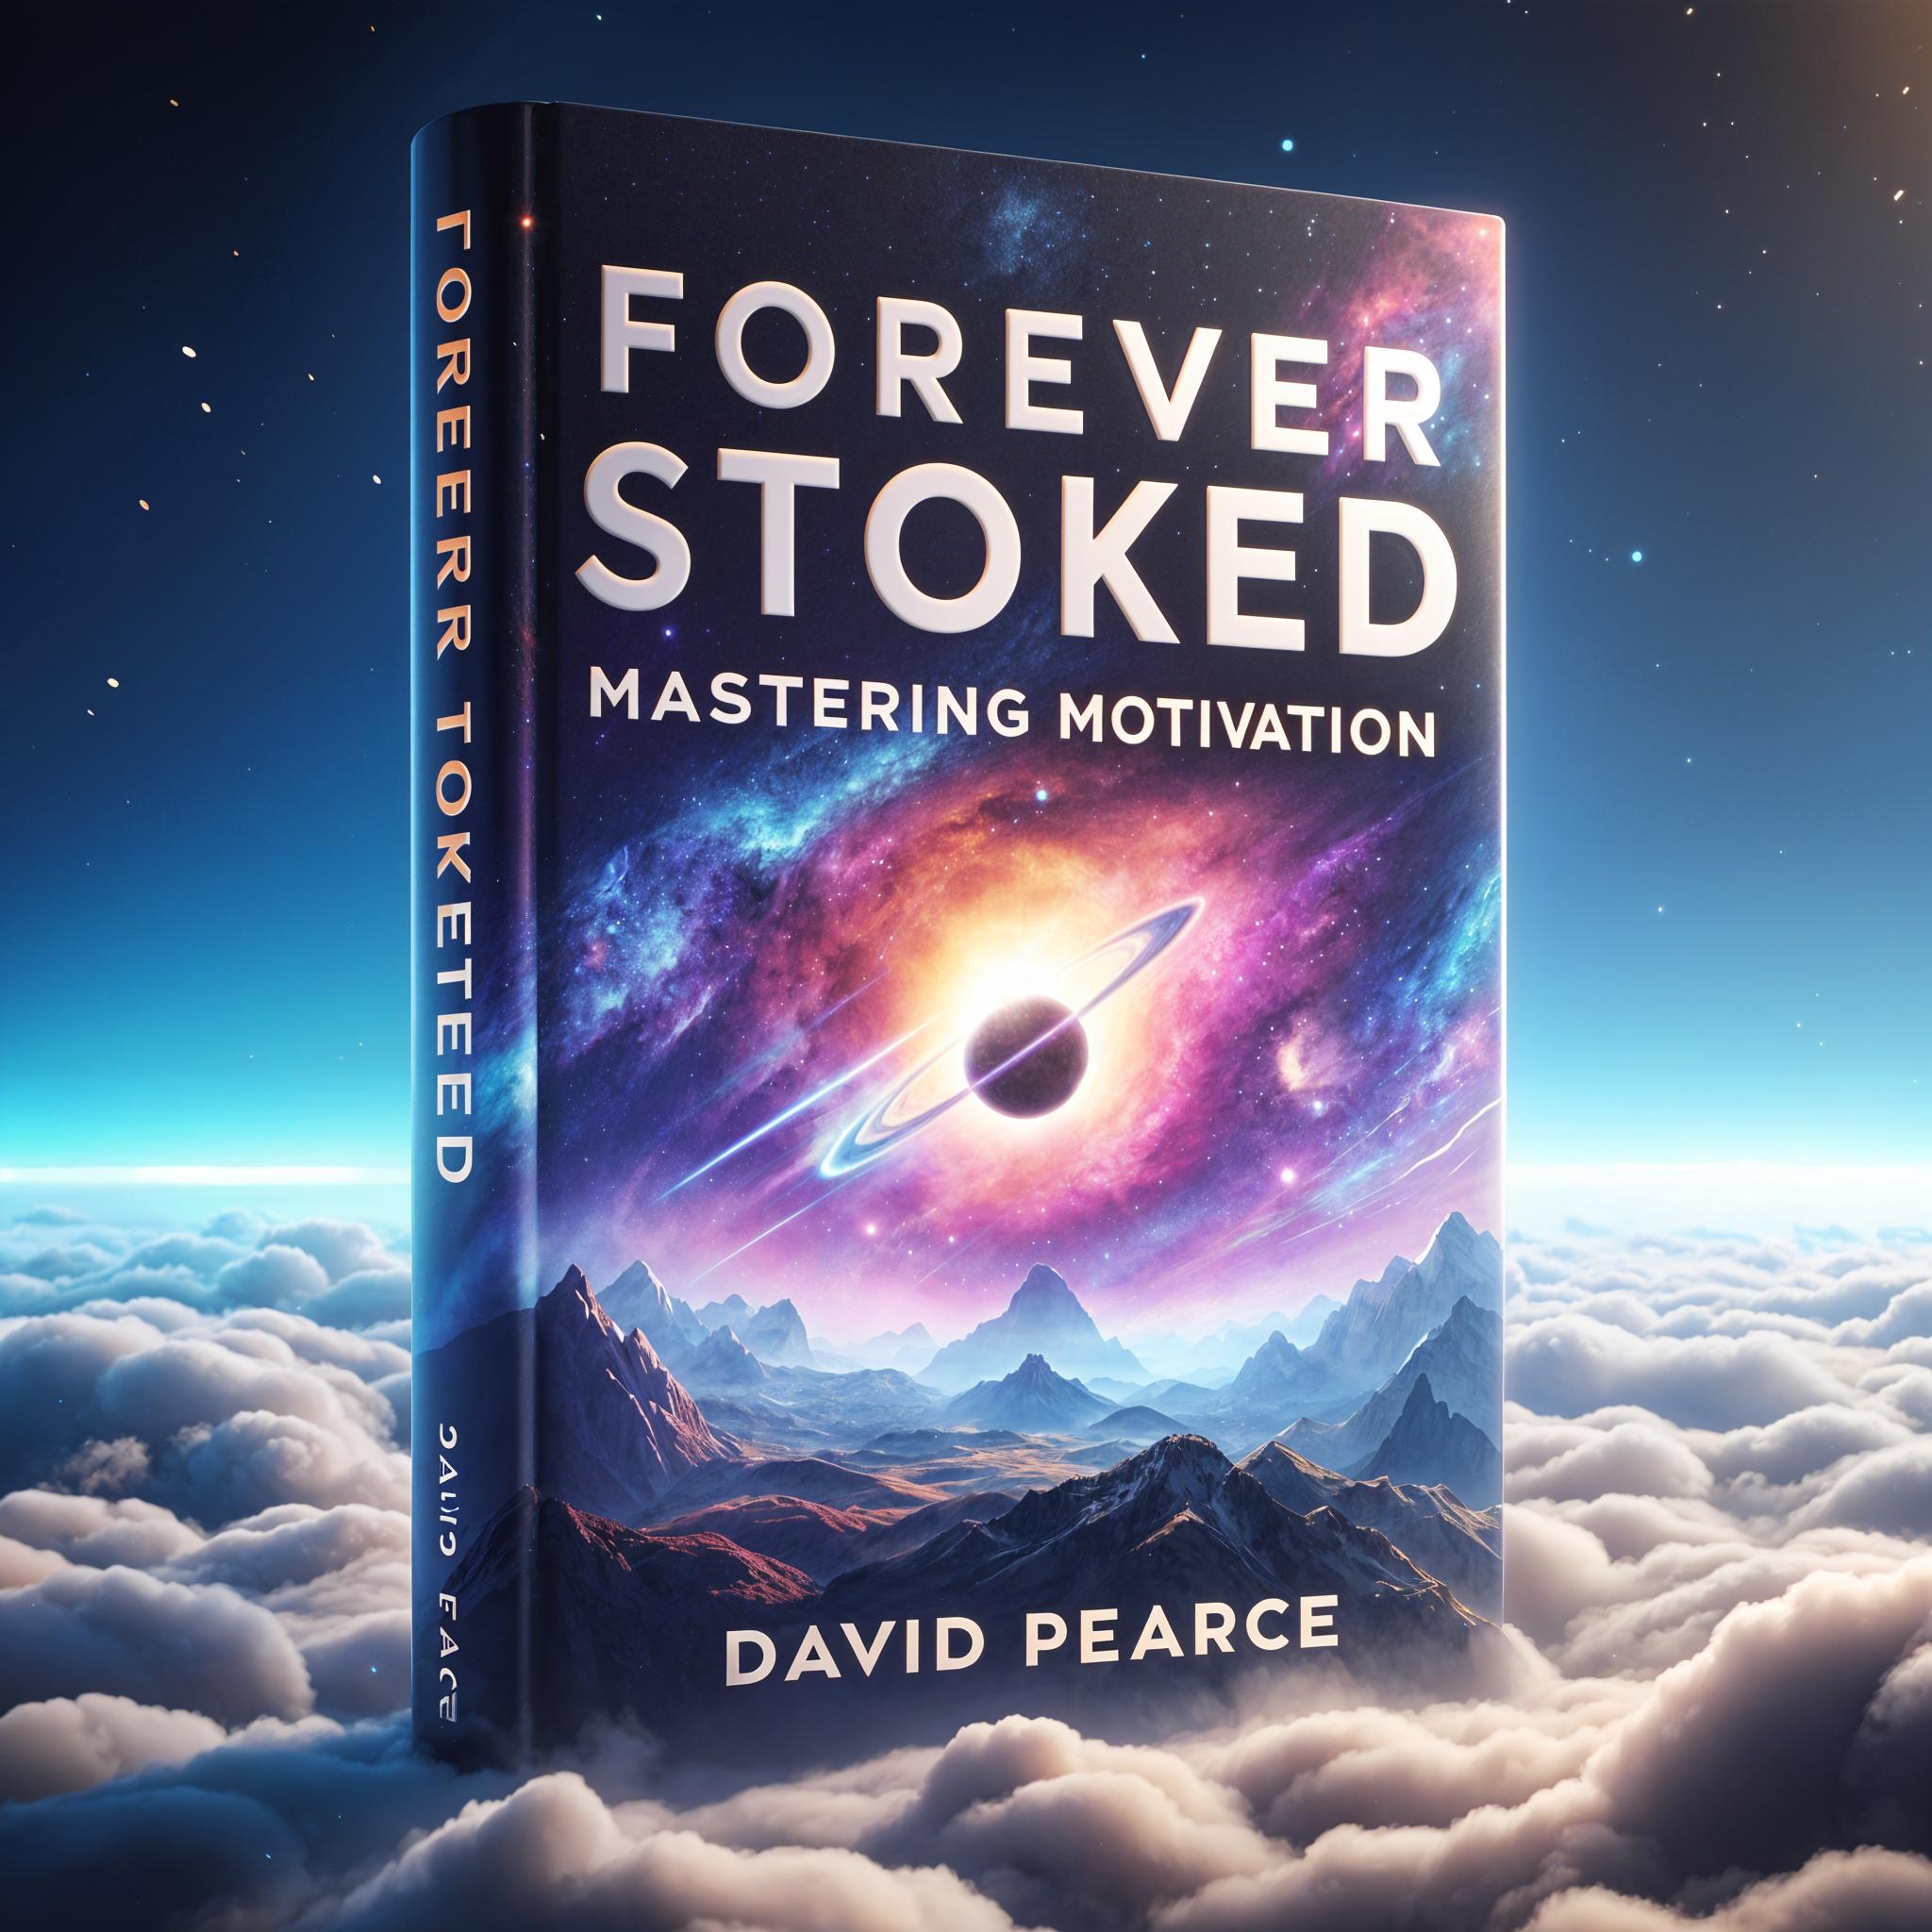 Forever Stoked by David Pearce